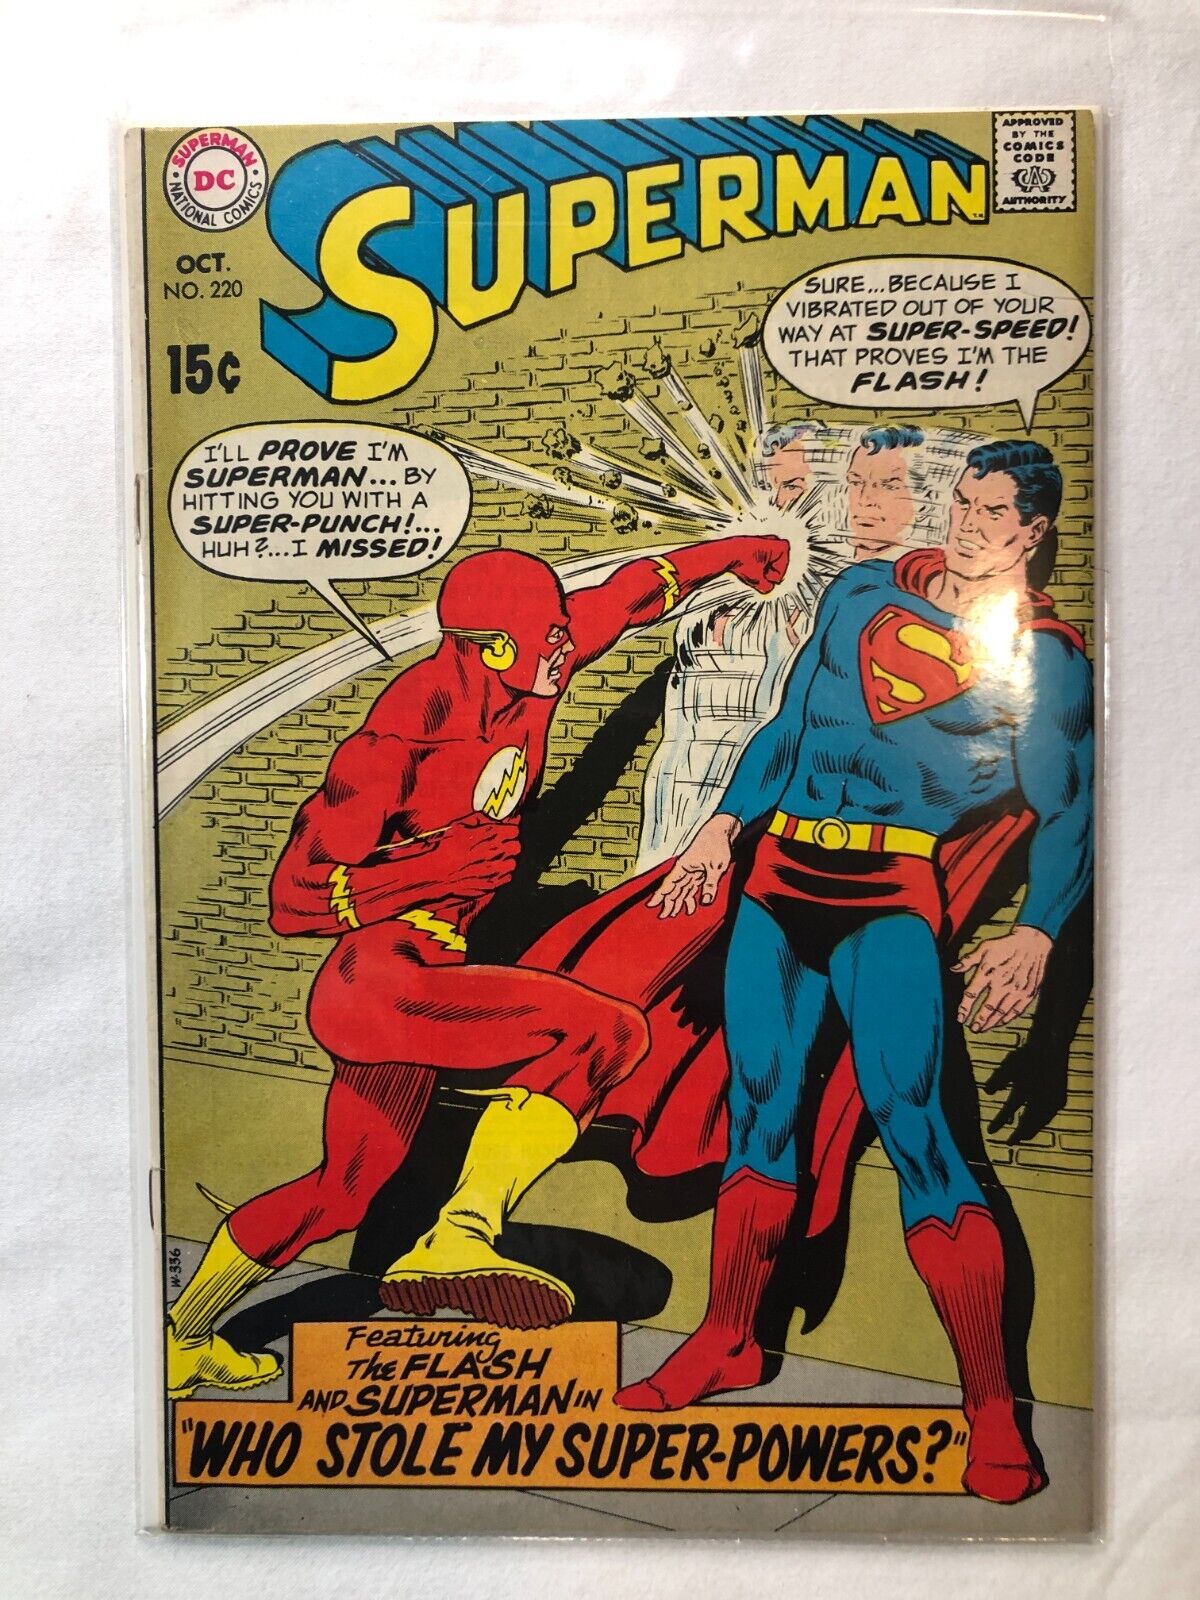 Superman #220 Oct 1969 Vintage Silver Age DC Comics Very Nice Condition